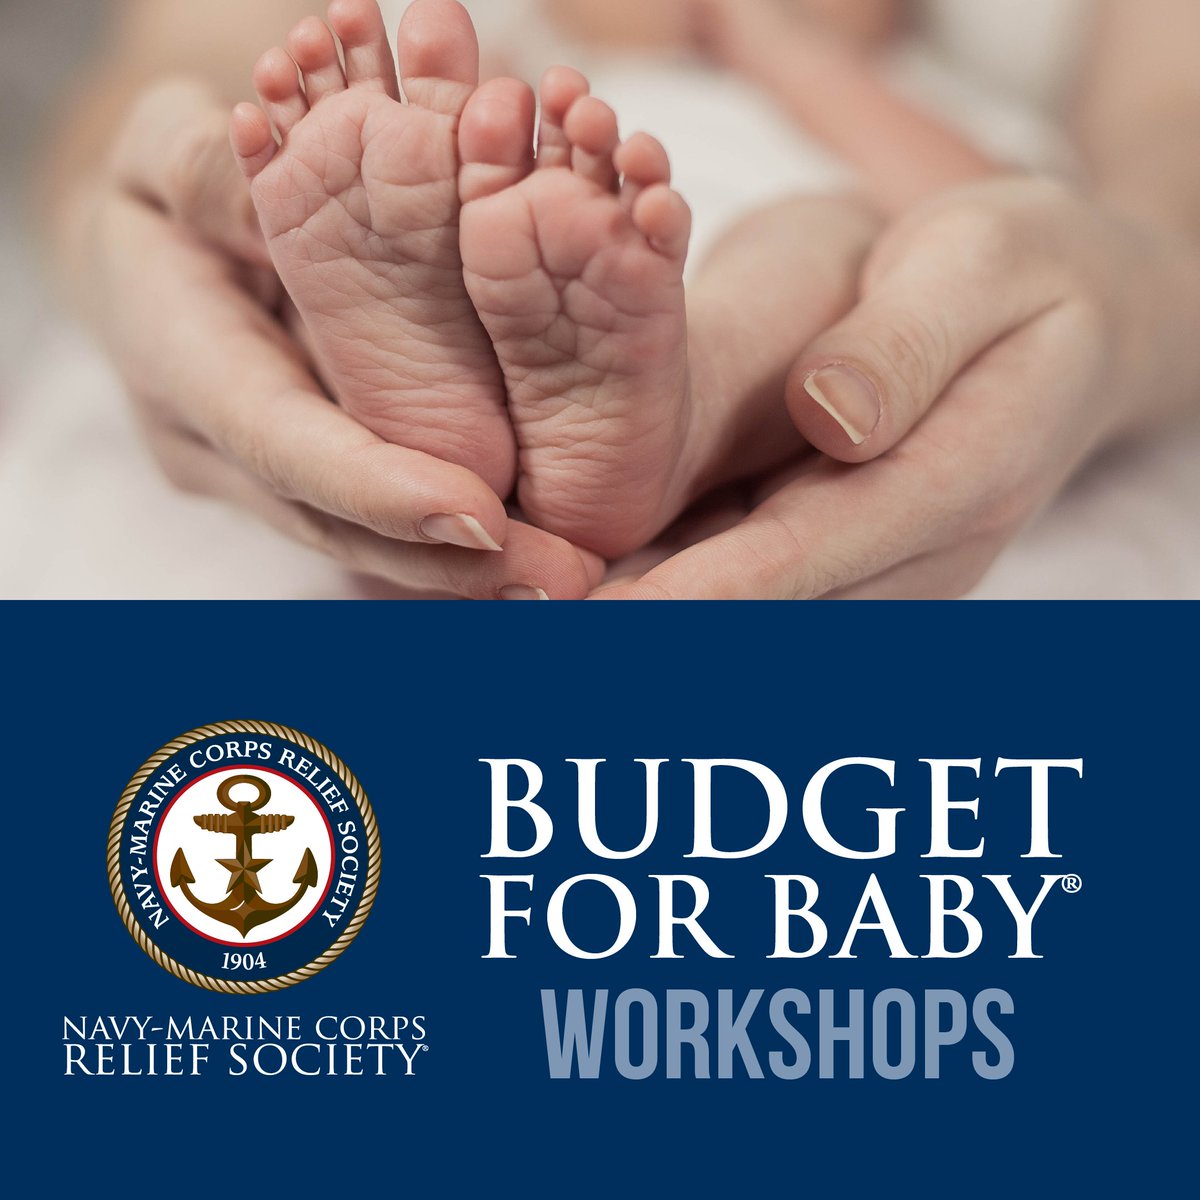 Expecting a baby is an exciting time for a family. Planning for the financial impact of a baby is an important part of your preparations. Start your planning with our free Budget for Baby workshop. Learn more here: nmcrs.org/pages/budgetin…
#Marine #USNavy #militaryspouse